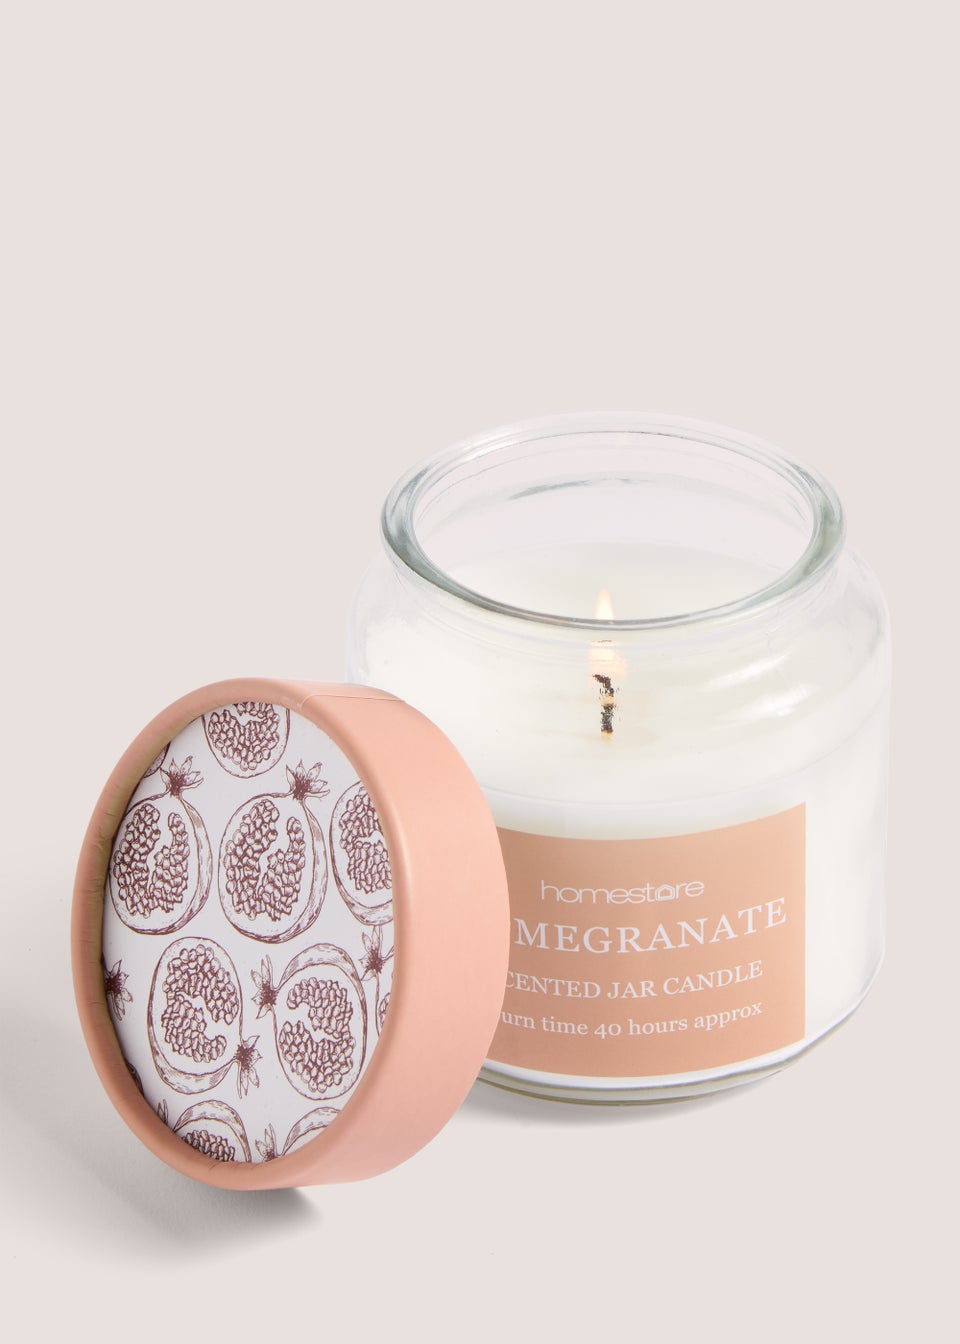 Pomegranate Scented Jar Candle (340g)